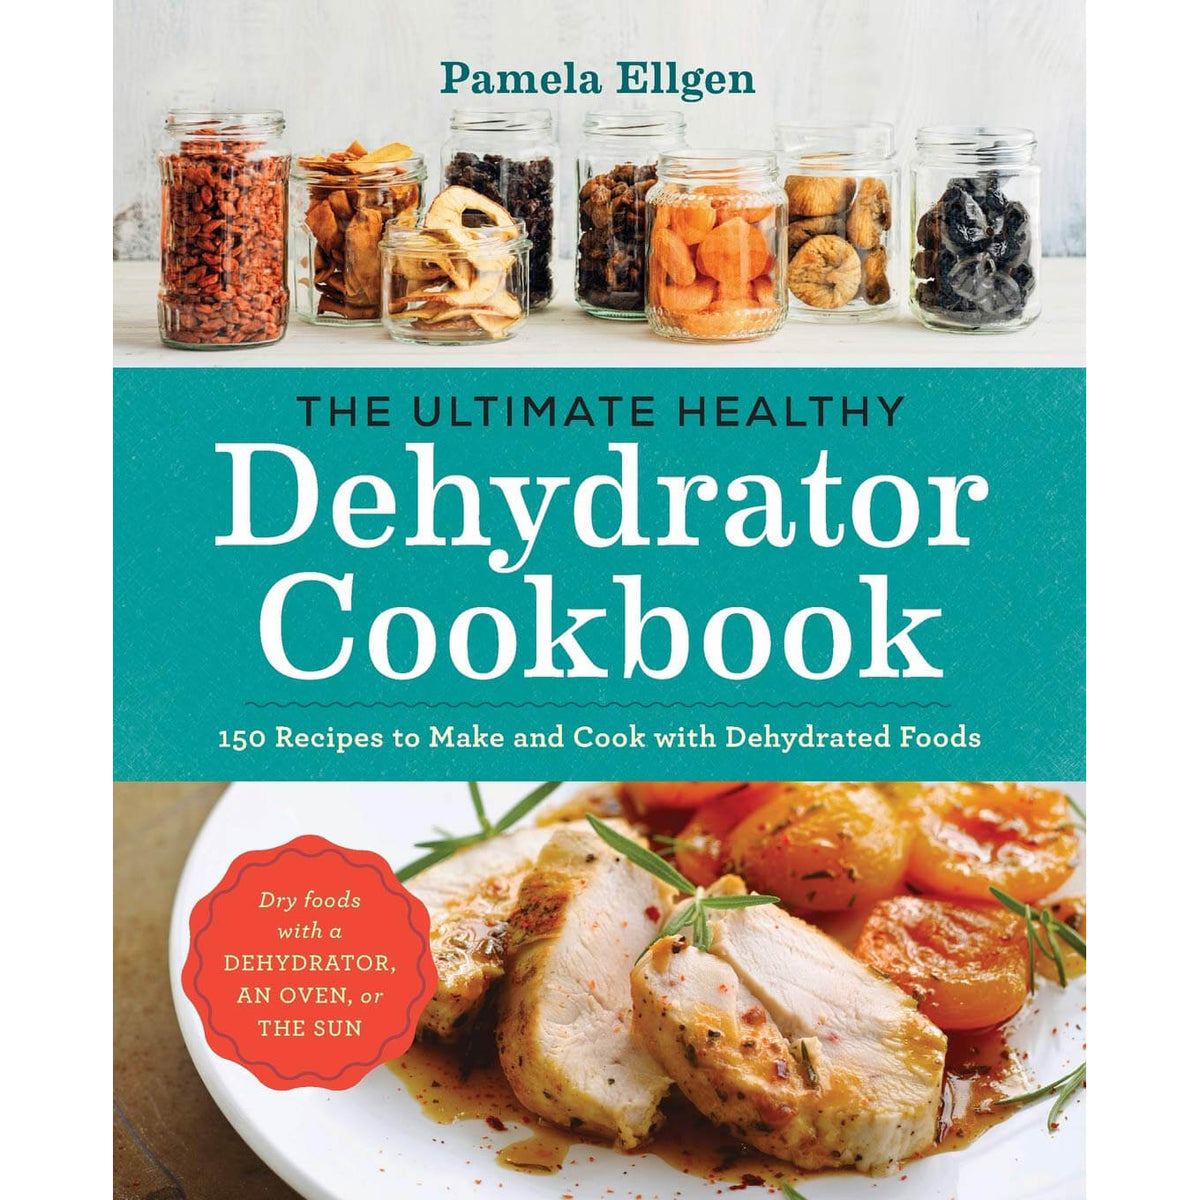 The Ultimate Healthy Dehydrator Cookbook: 150 Recipes to Make and Cook with Dehydrated Foods front cover.